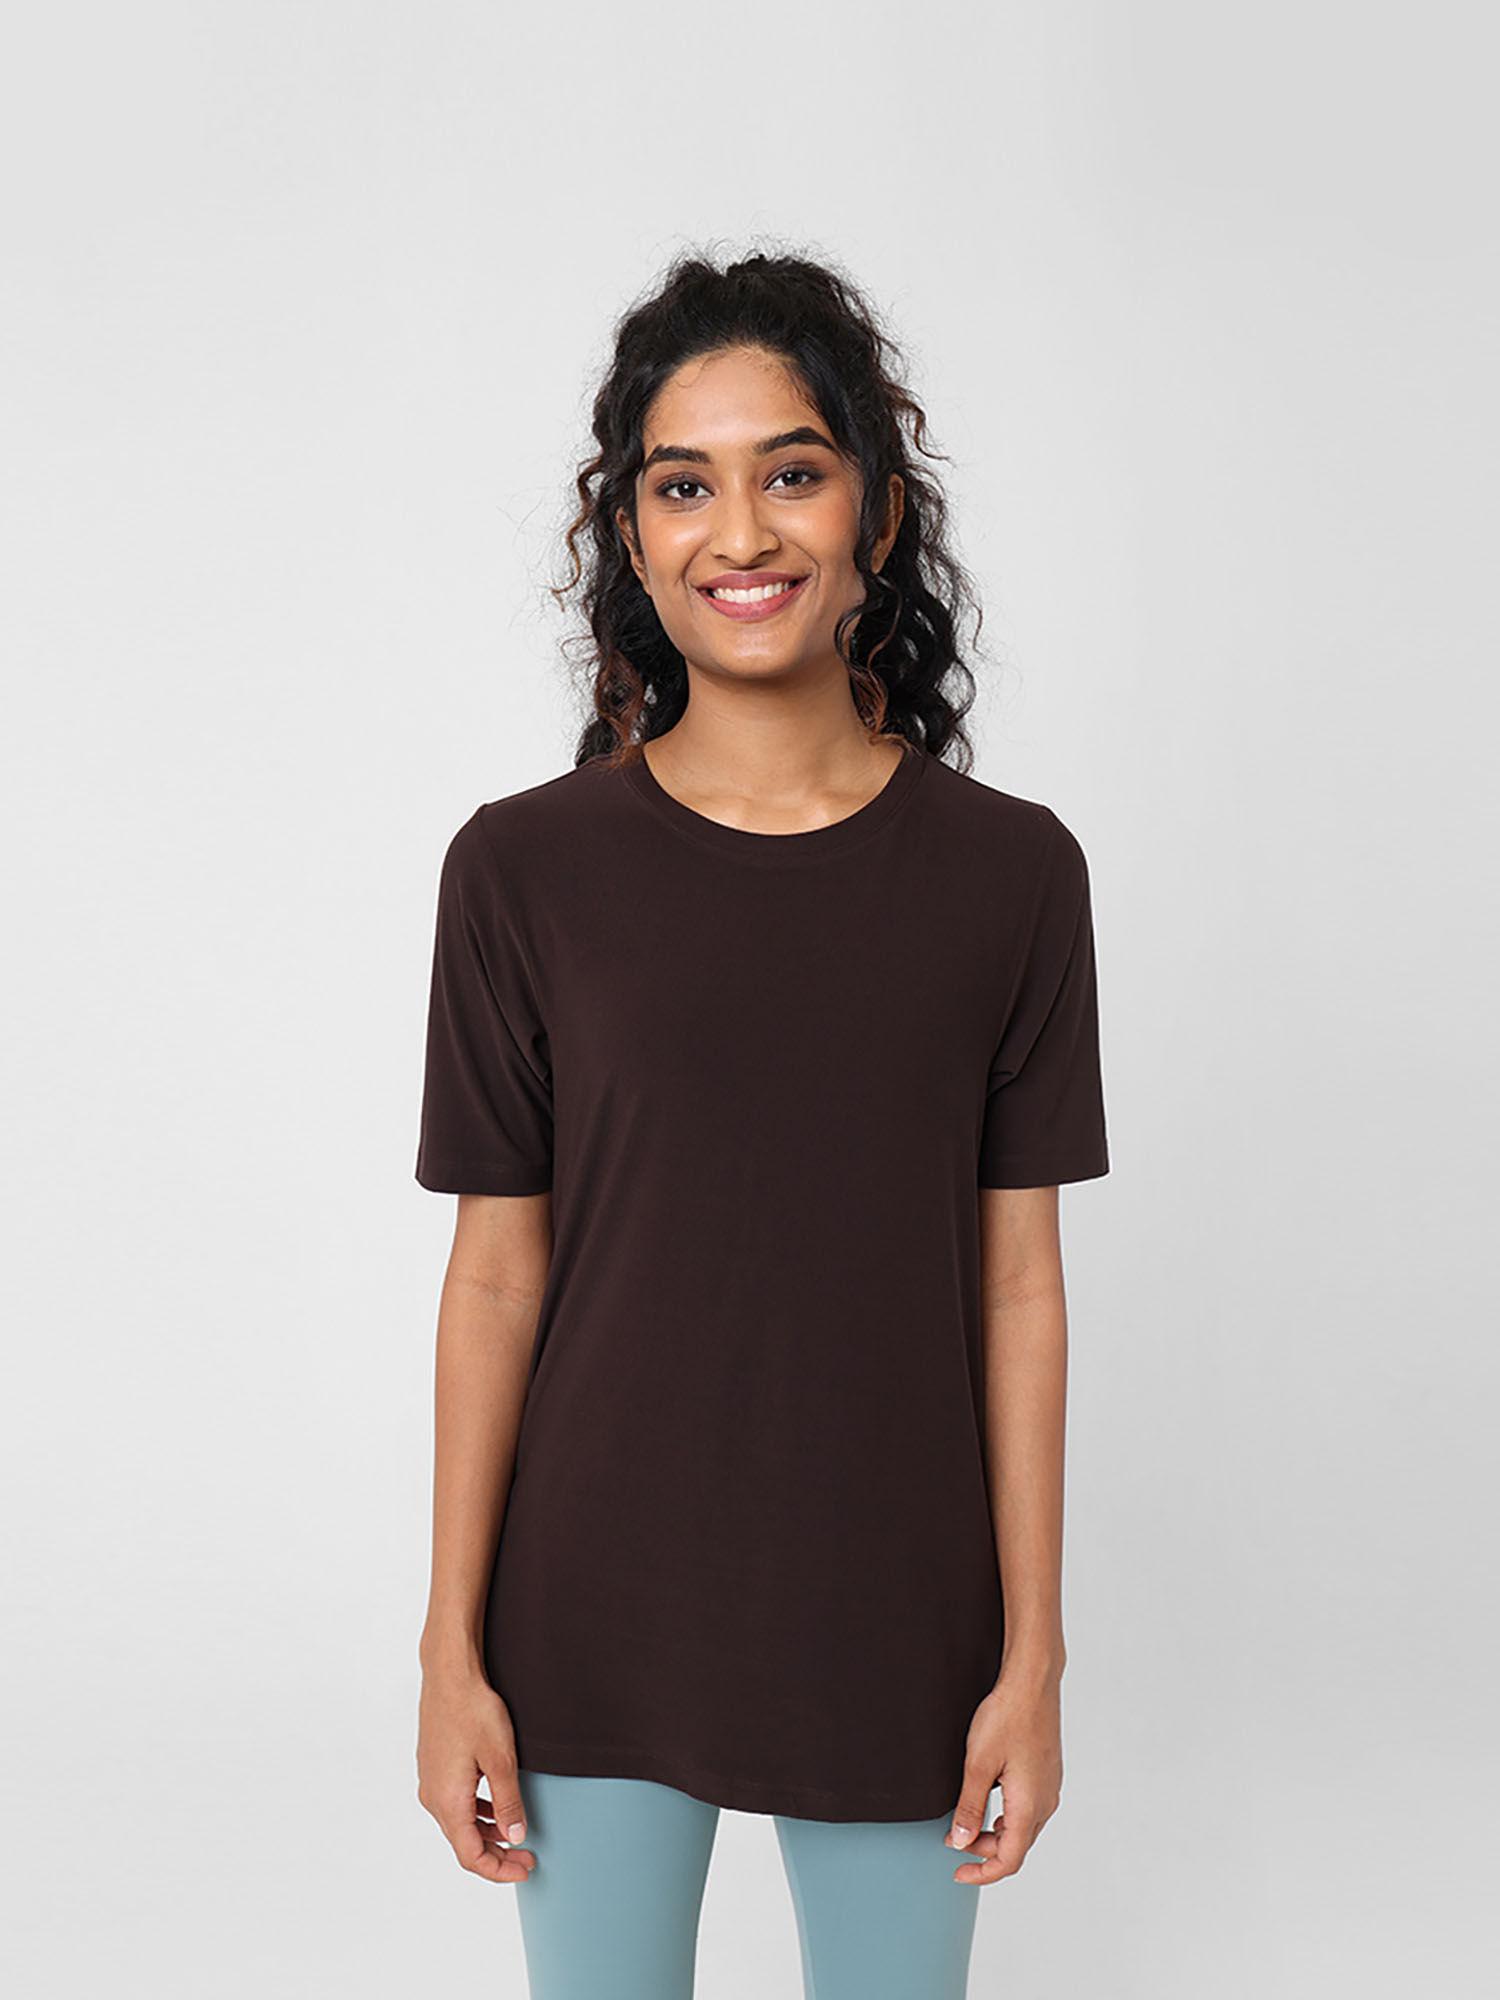 women-brown-breezy-kur-tee-with-2-pockets-and-side-slit